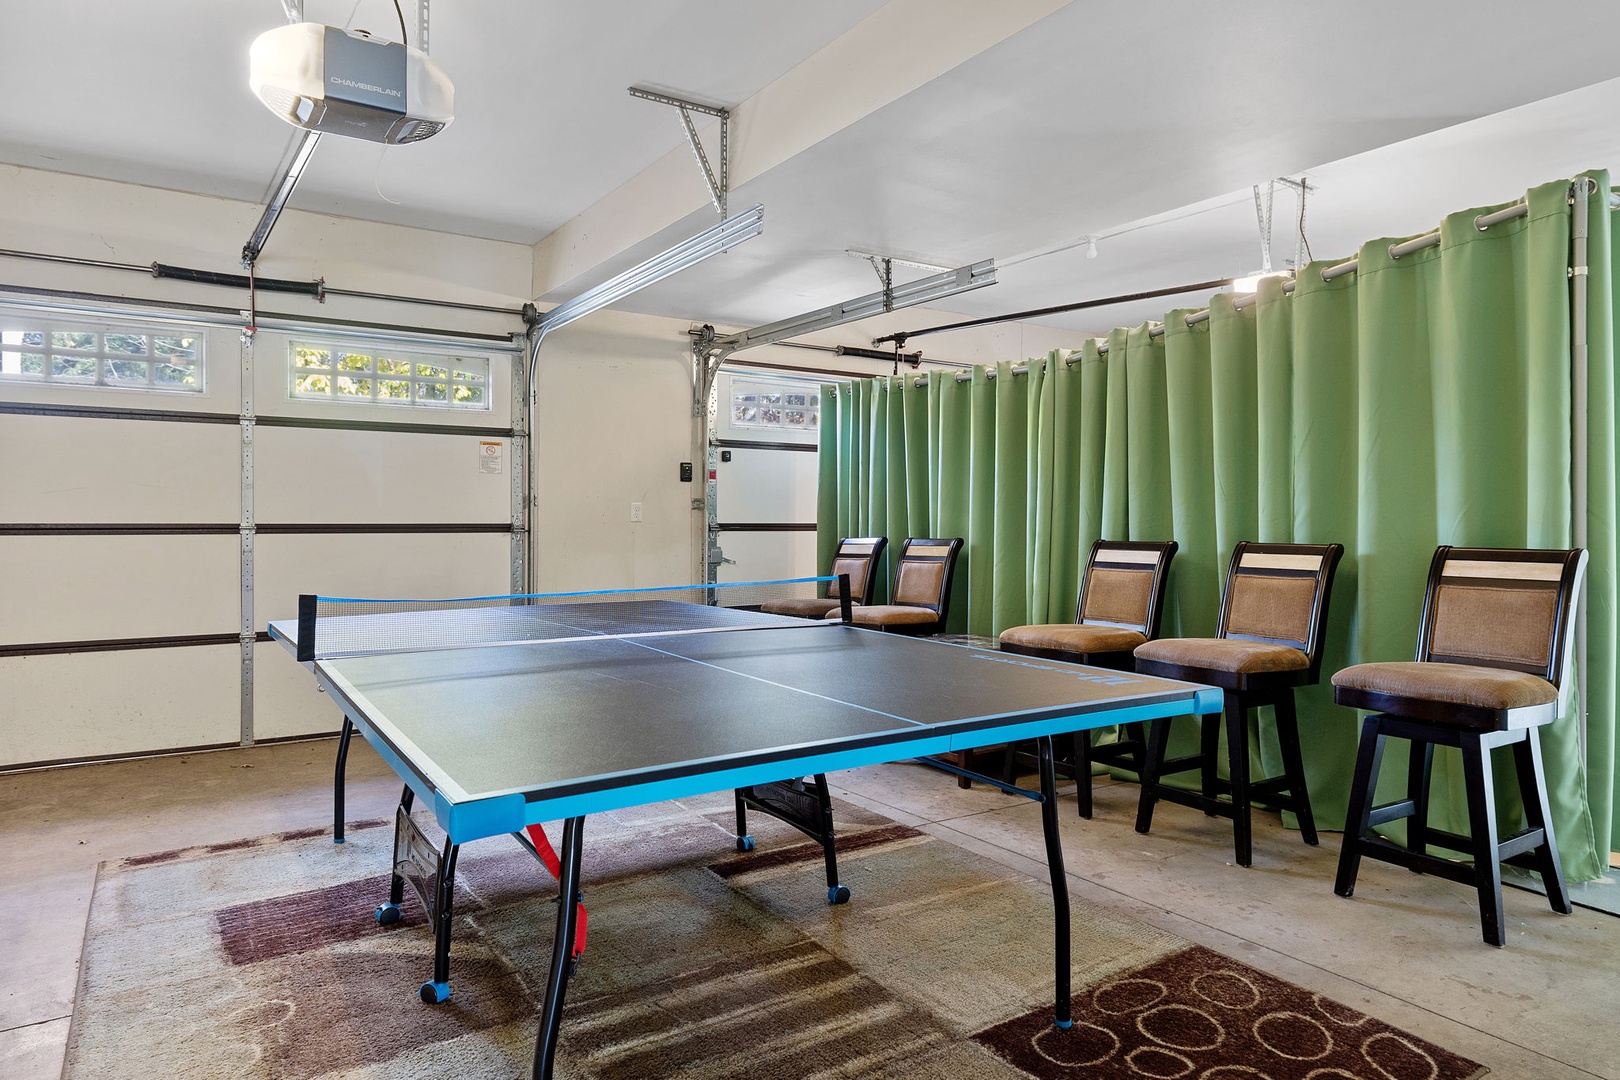 Those who enjoy playing ping-pong have a space for them to hang out.